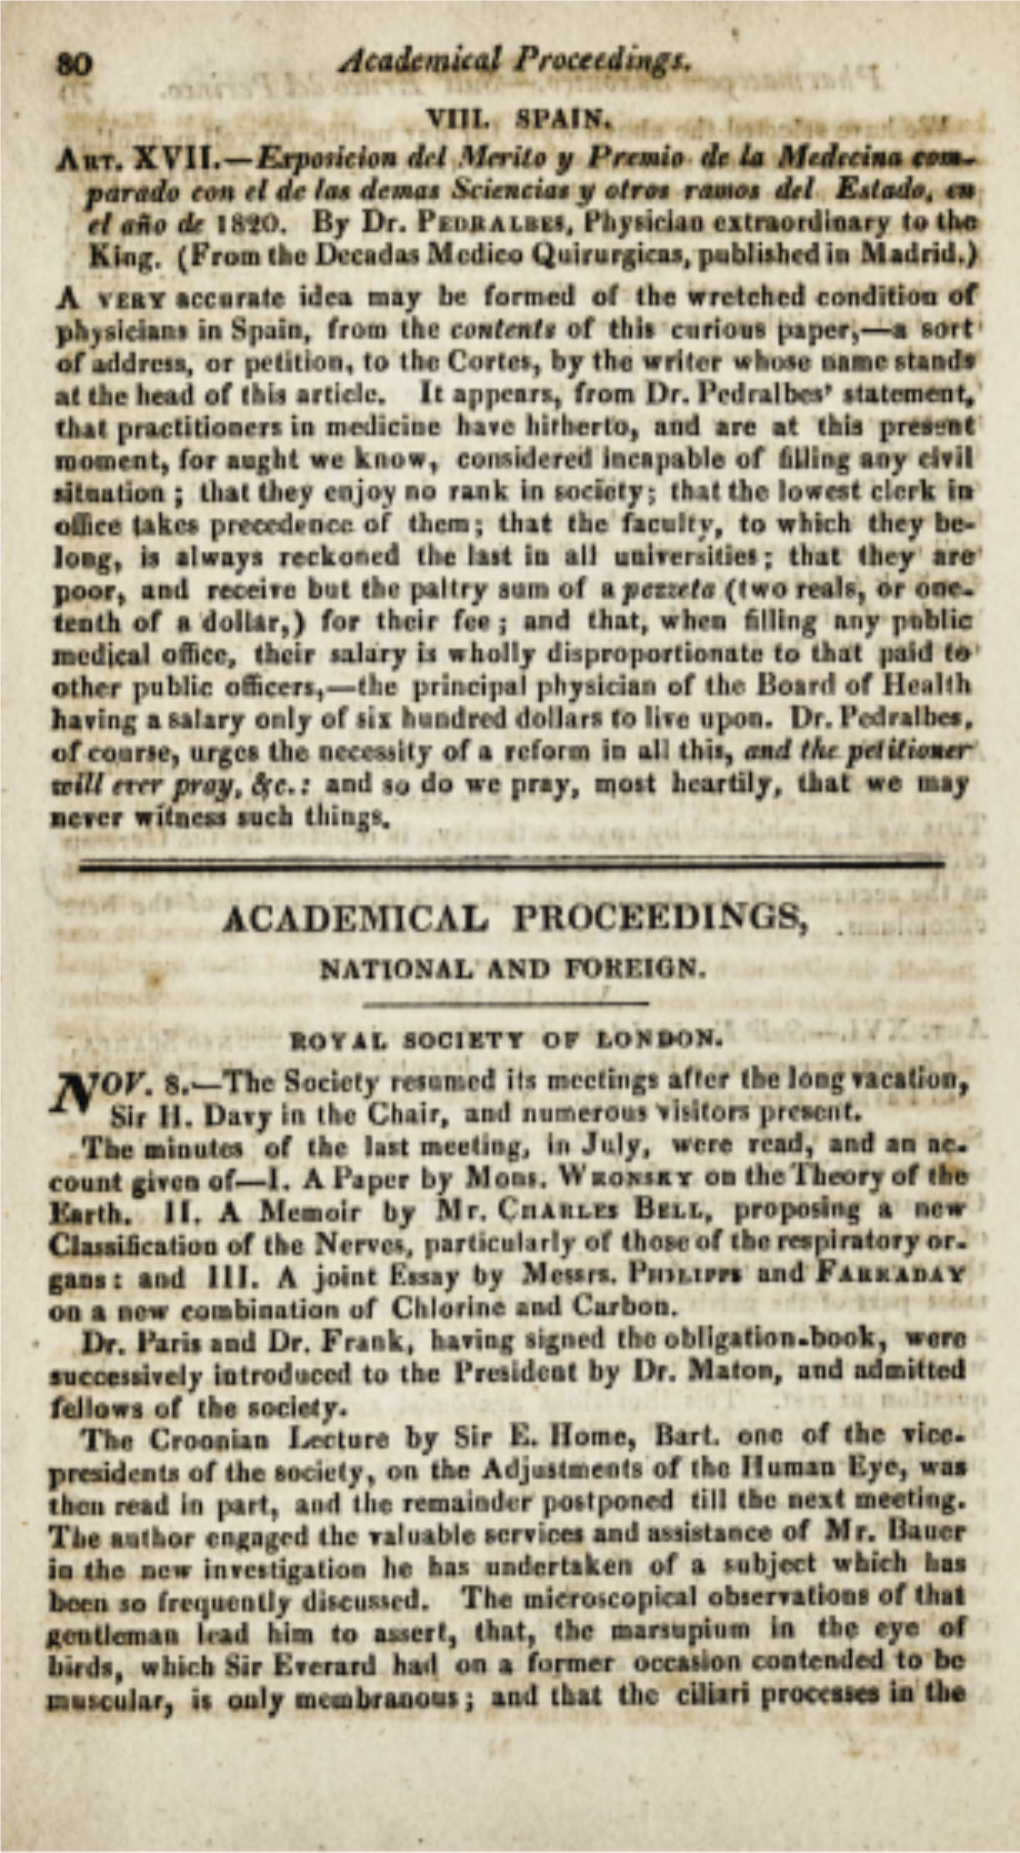 Academical Proceedings, National and Foreign